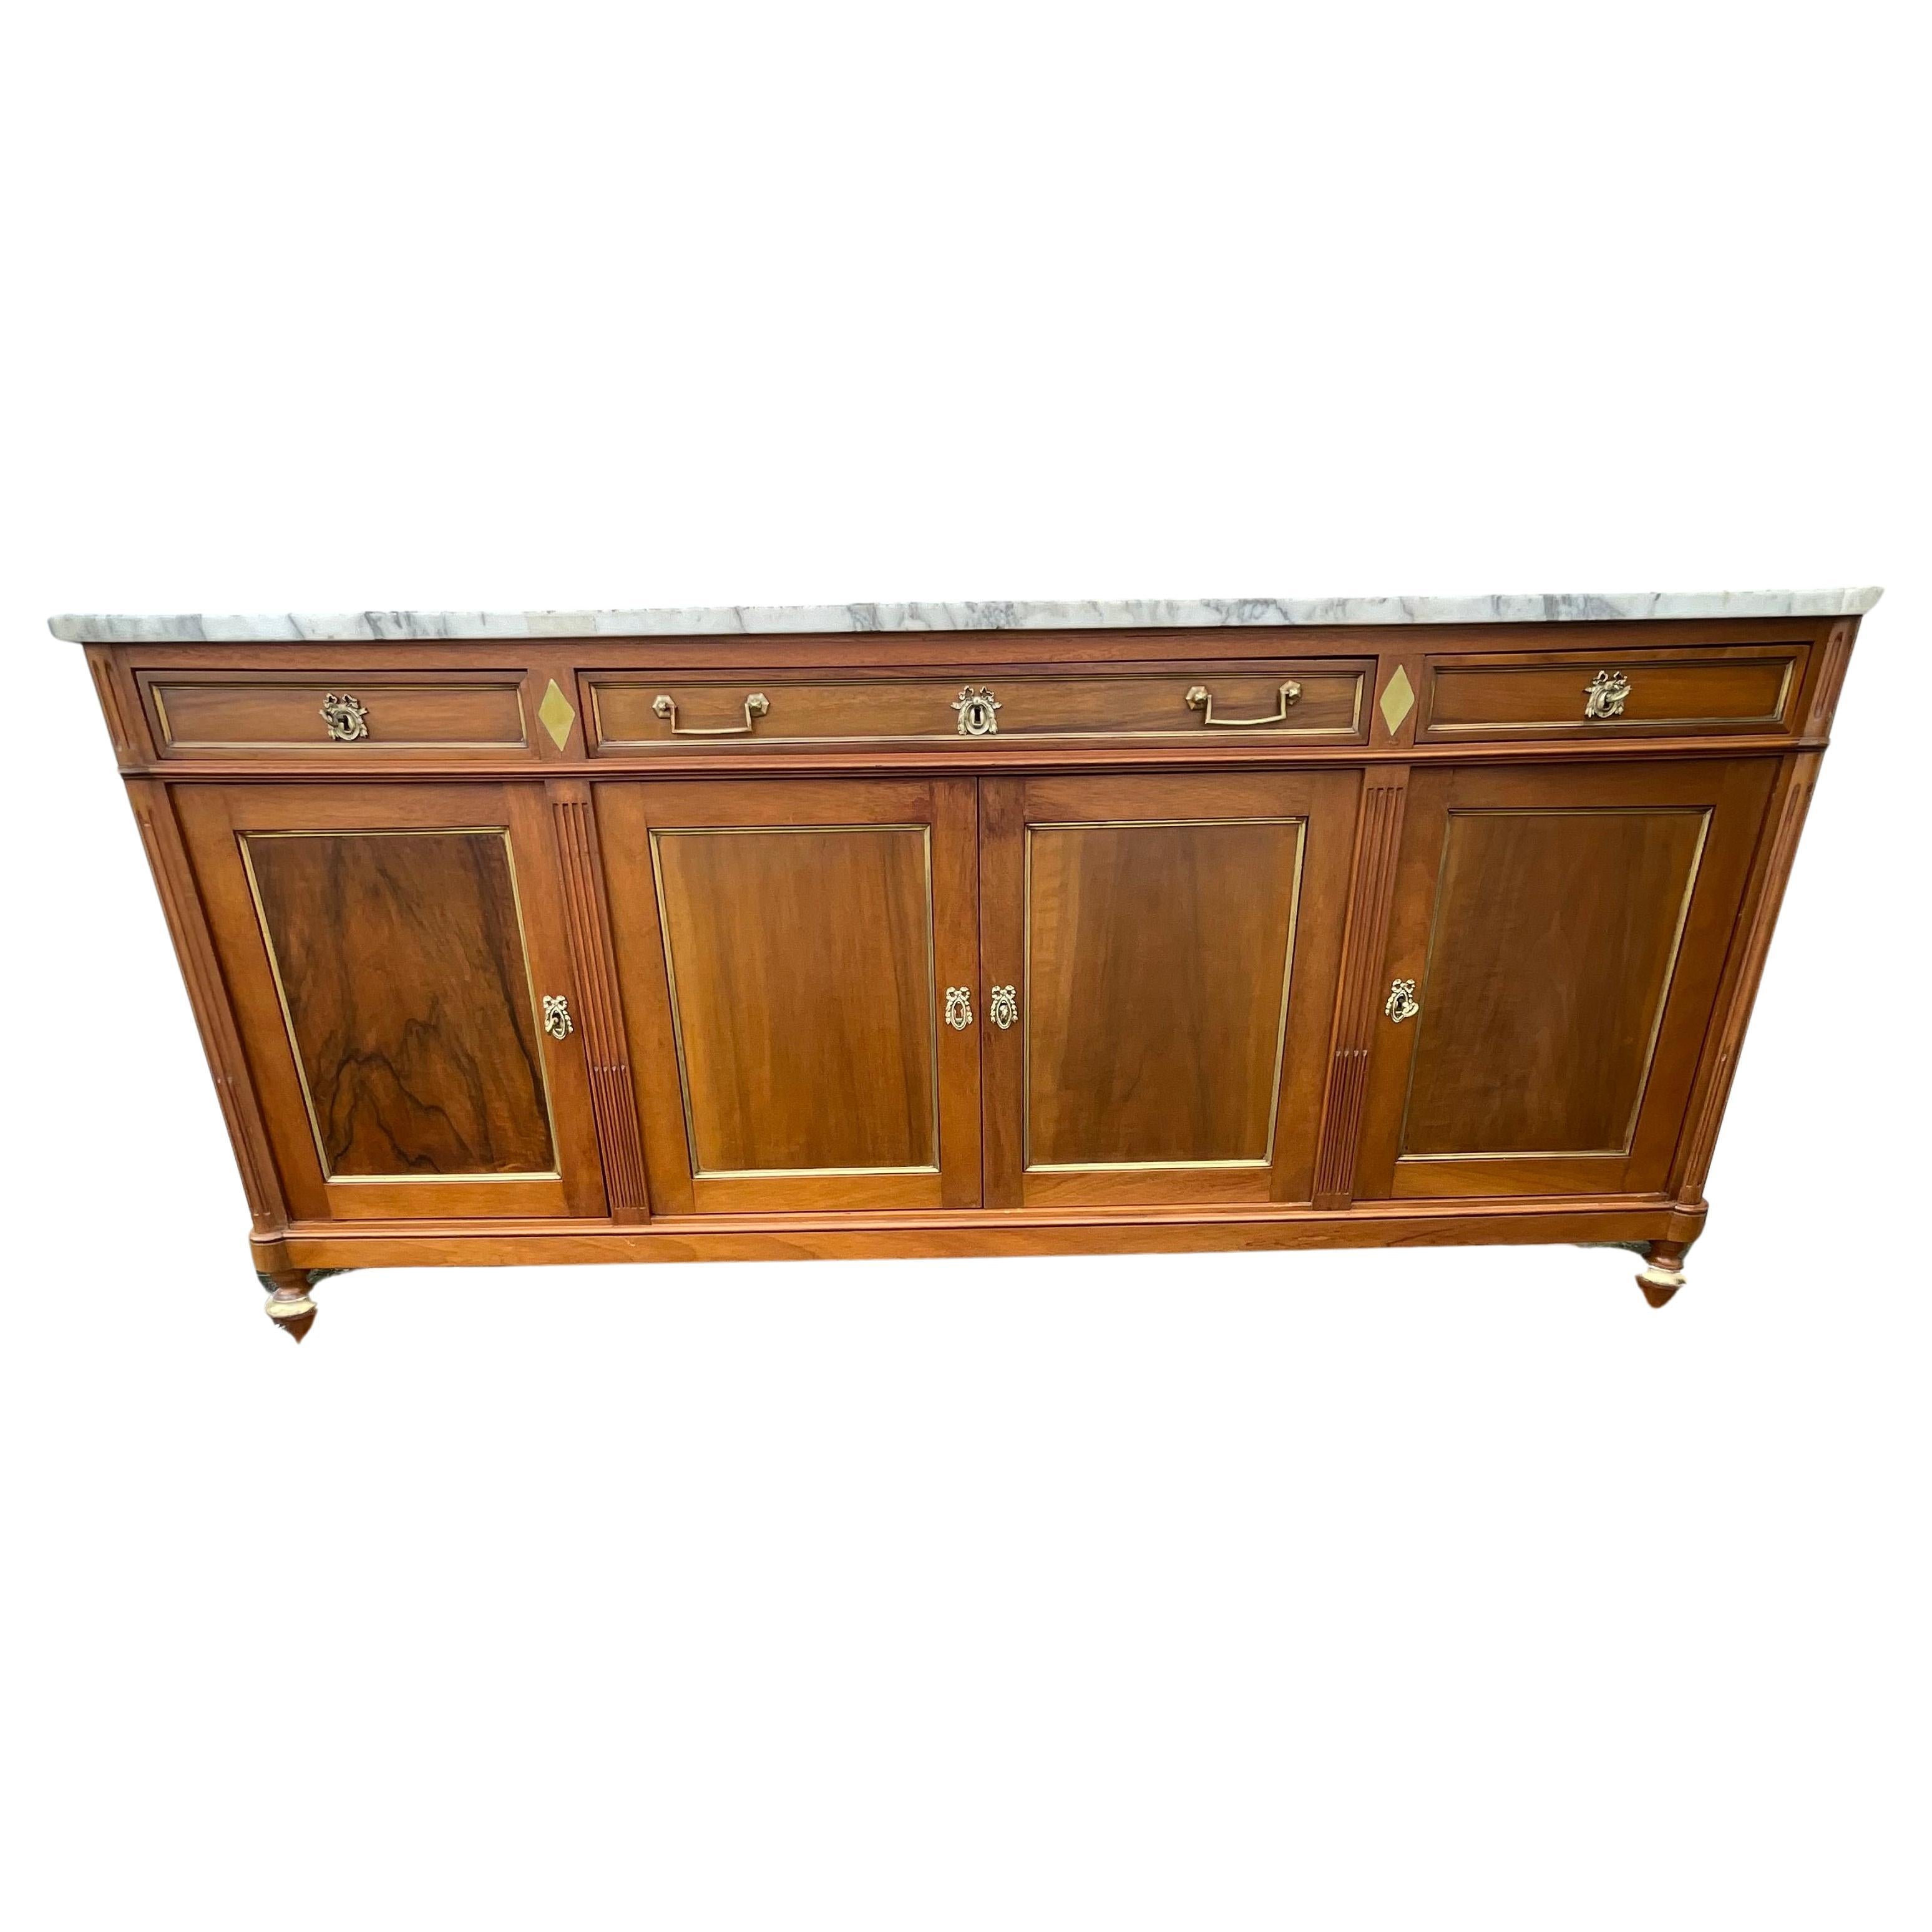 French Louis XVI Style Sideboard Early 20th Century In Walnut